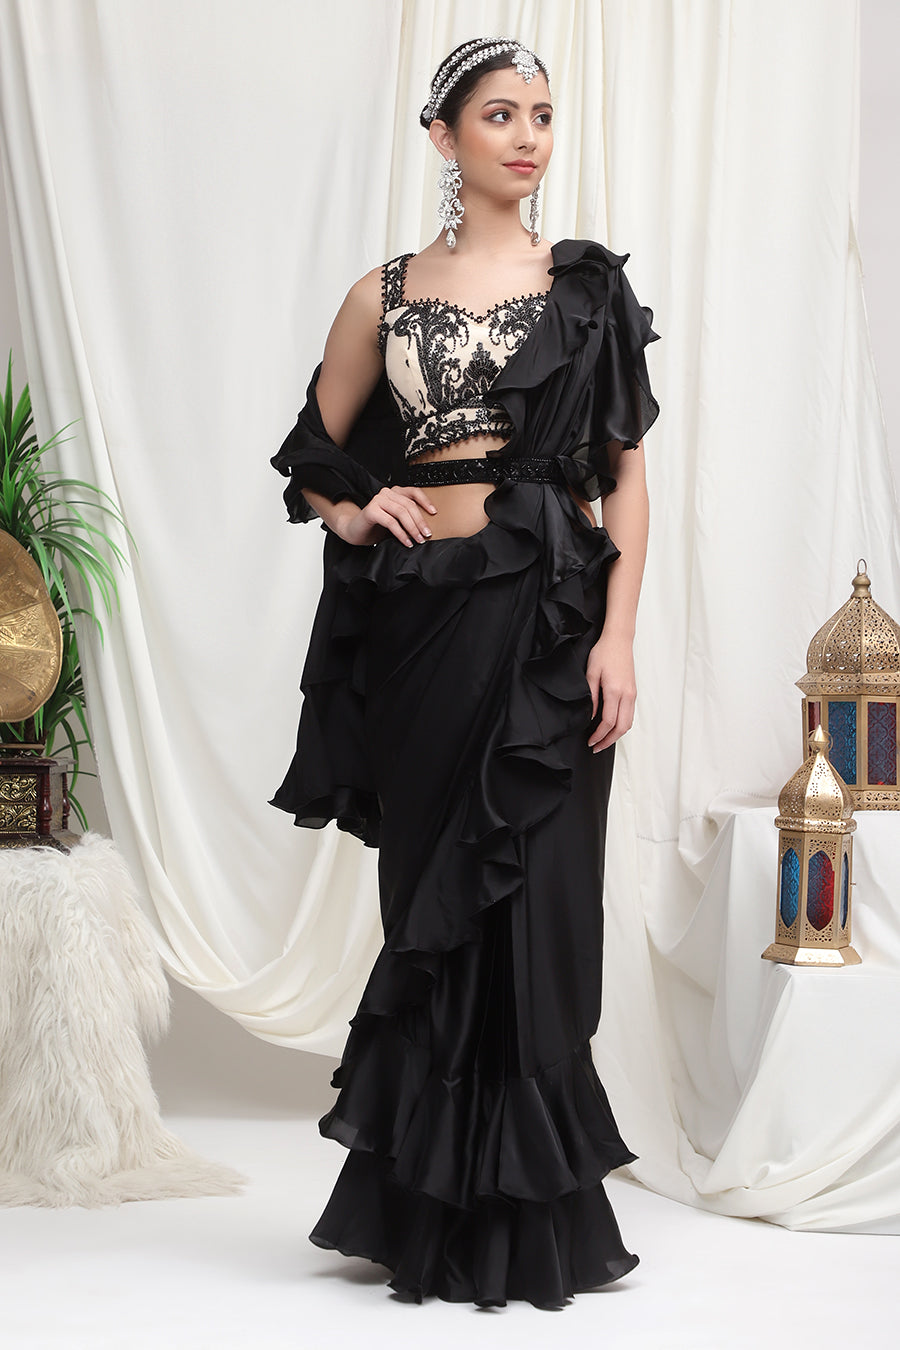 Black Ruffle Belt Saree With Hanging Stones Embroidery – LIBAS CAFE